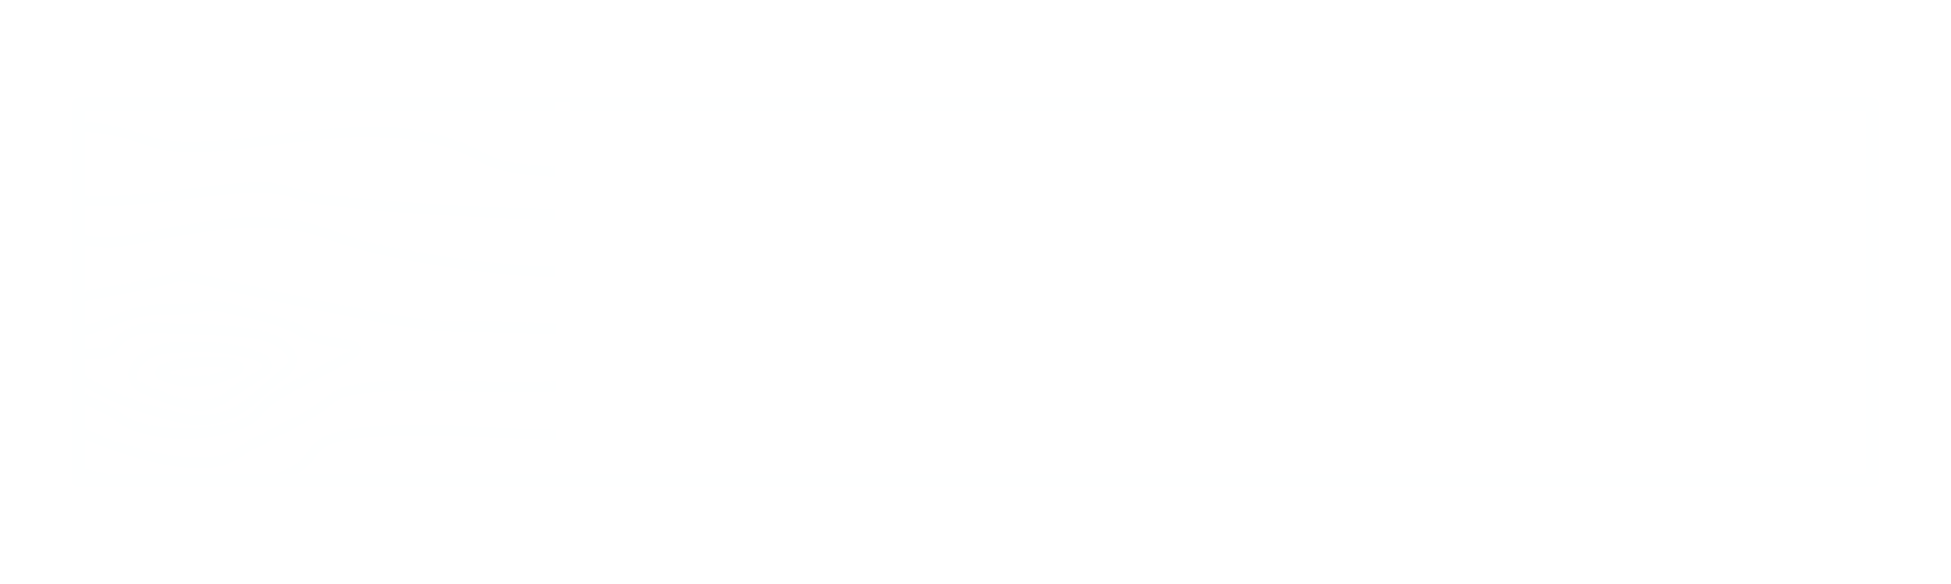 Timbre Apartments  Apartments in Lakewood, WA